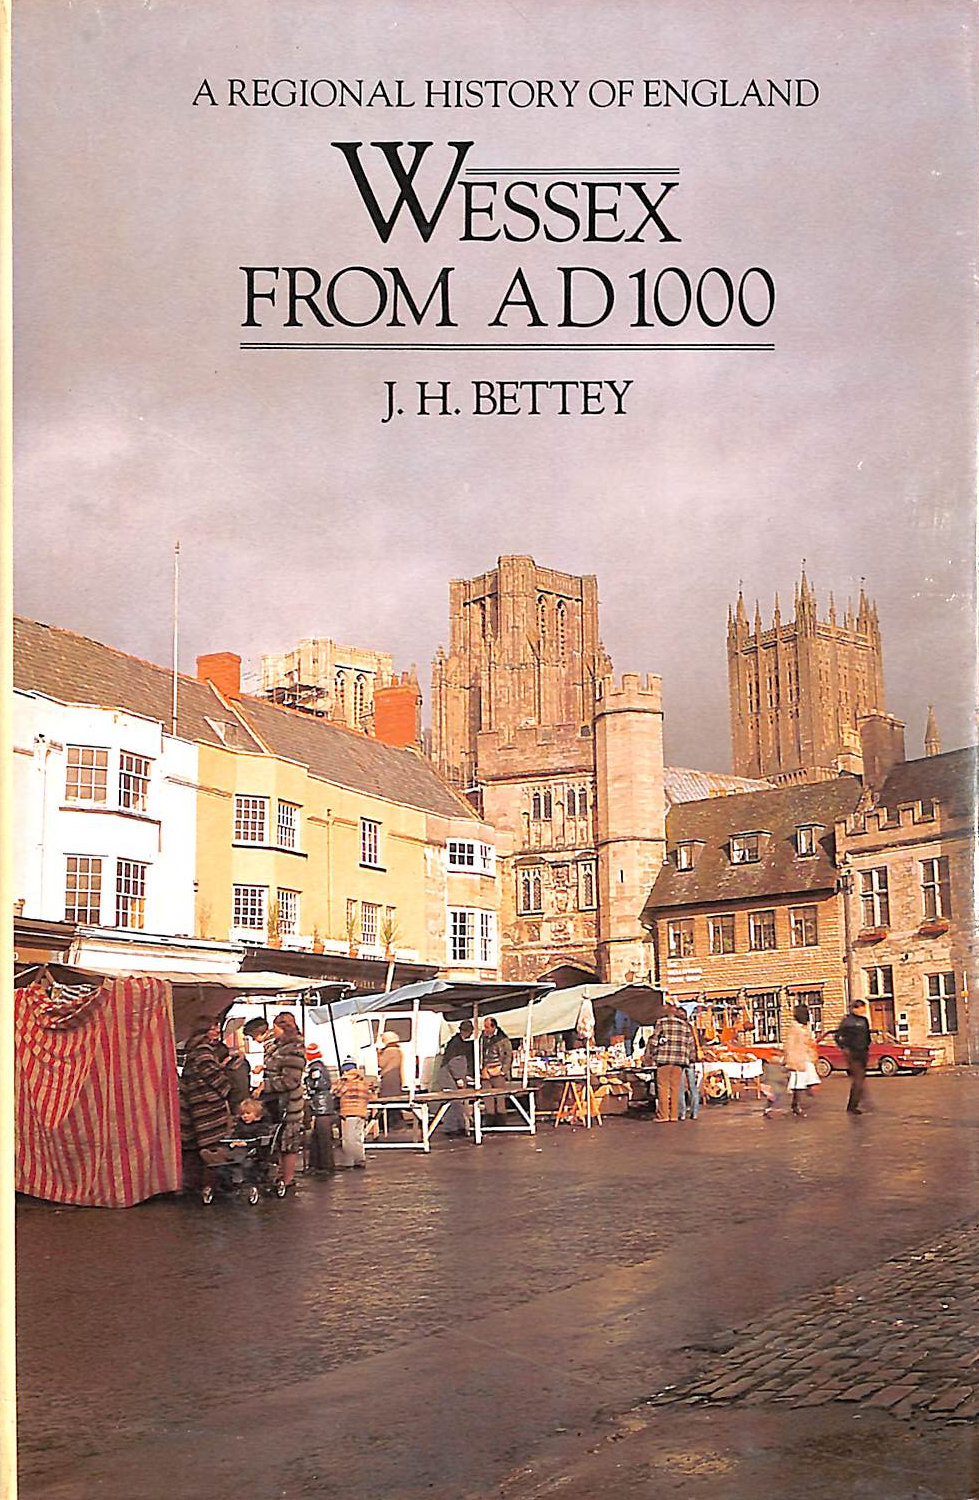 BETTEY, J. H. - Wessex from A.D.1000 (RHE)